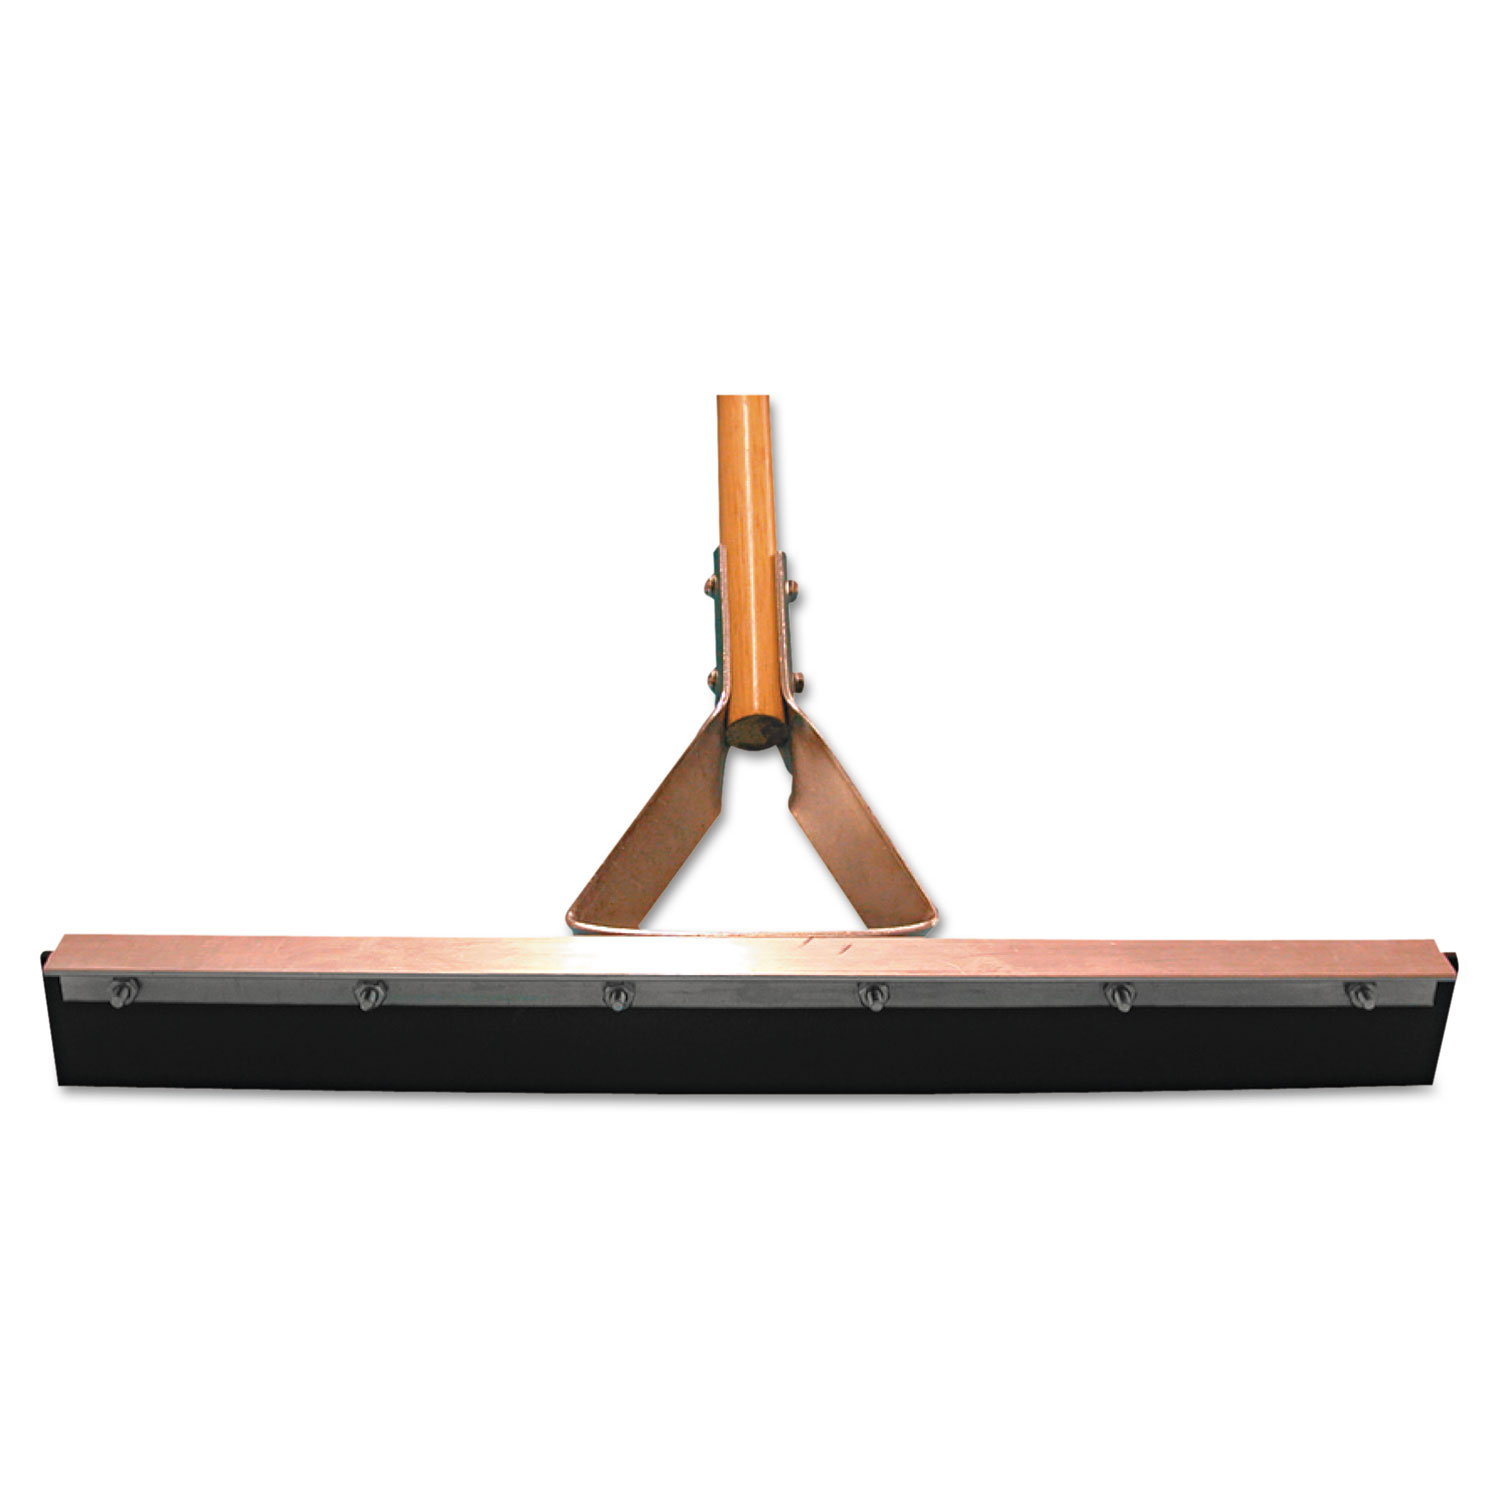 Straight Squeegee with Steel Bracket Handle, 24 Blade